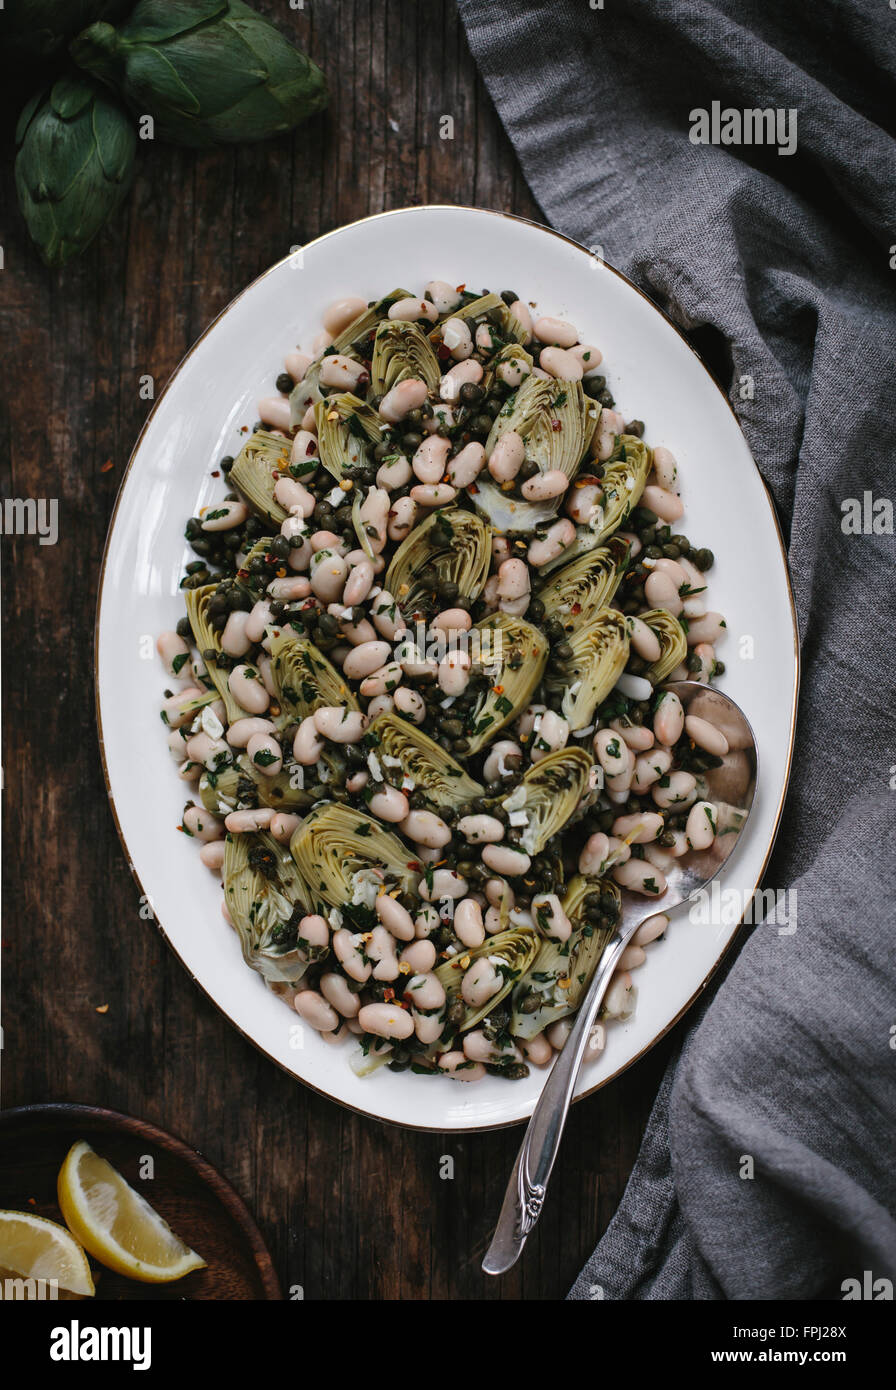 An oval plate filled with braised baby artichoke salad with white beans and capers is photographed from the top view. Stock Photo